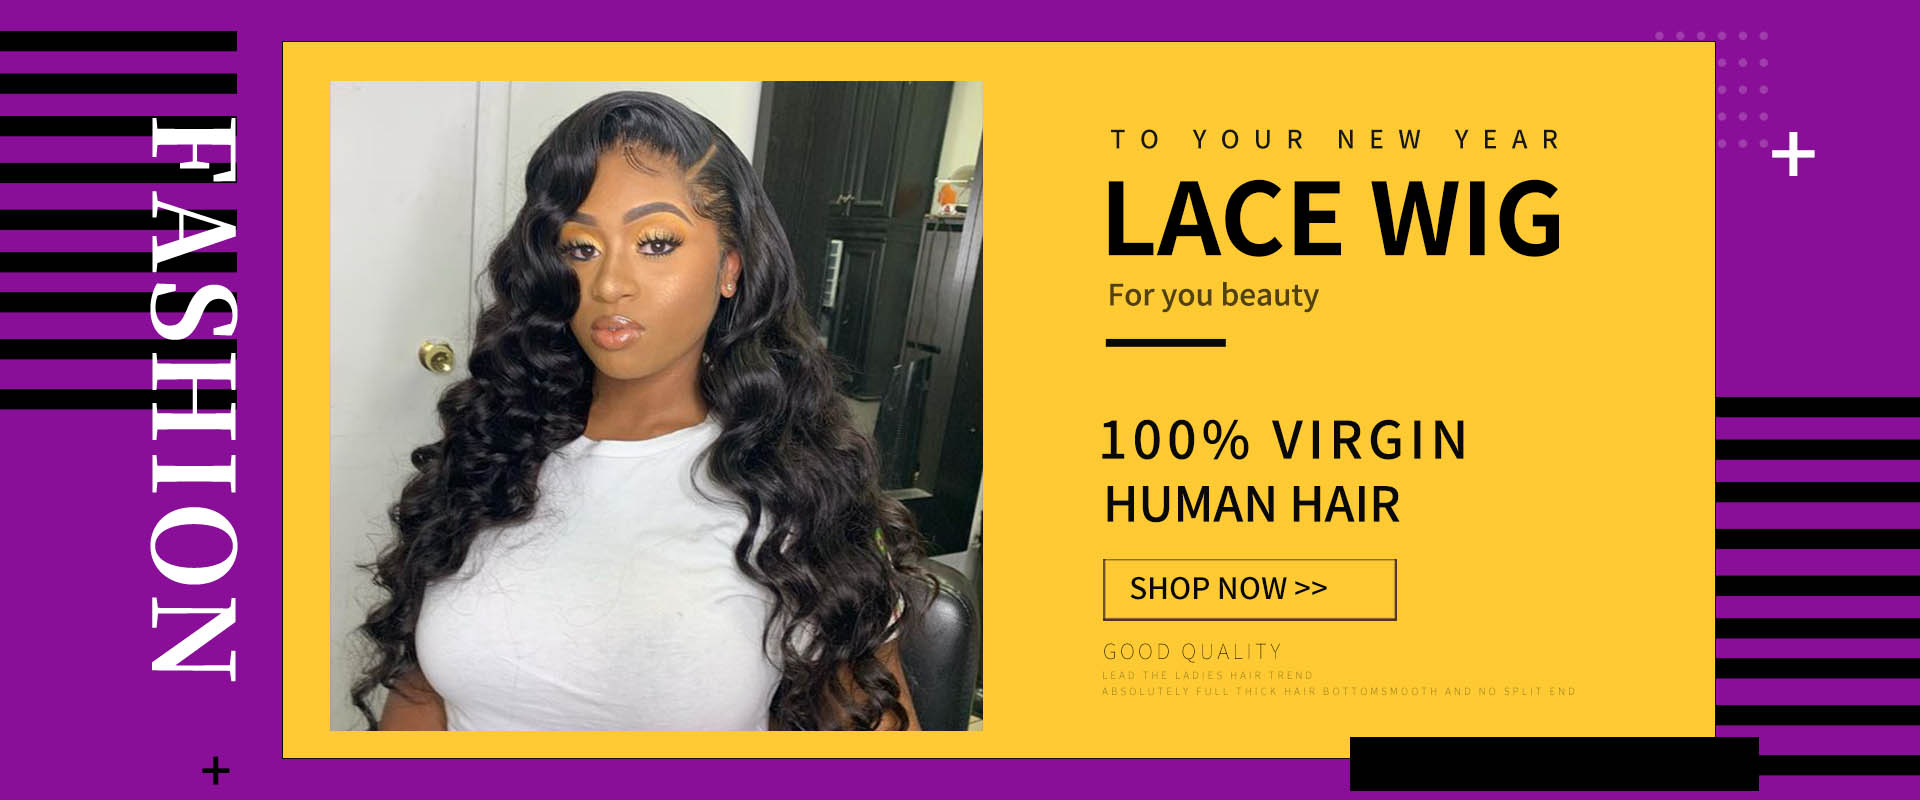 How To Apply Full Lace Wig And Lace Front Wig?